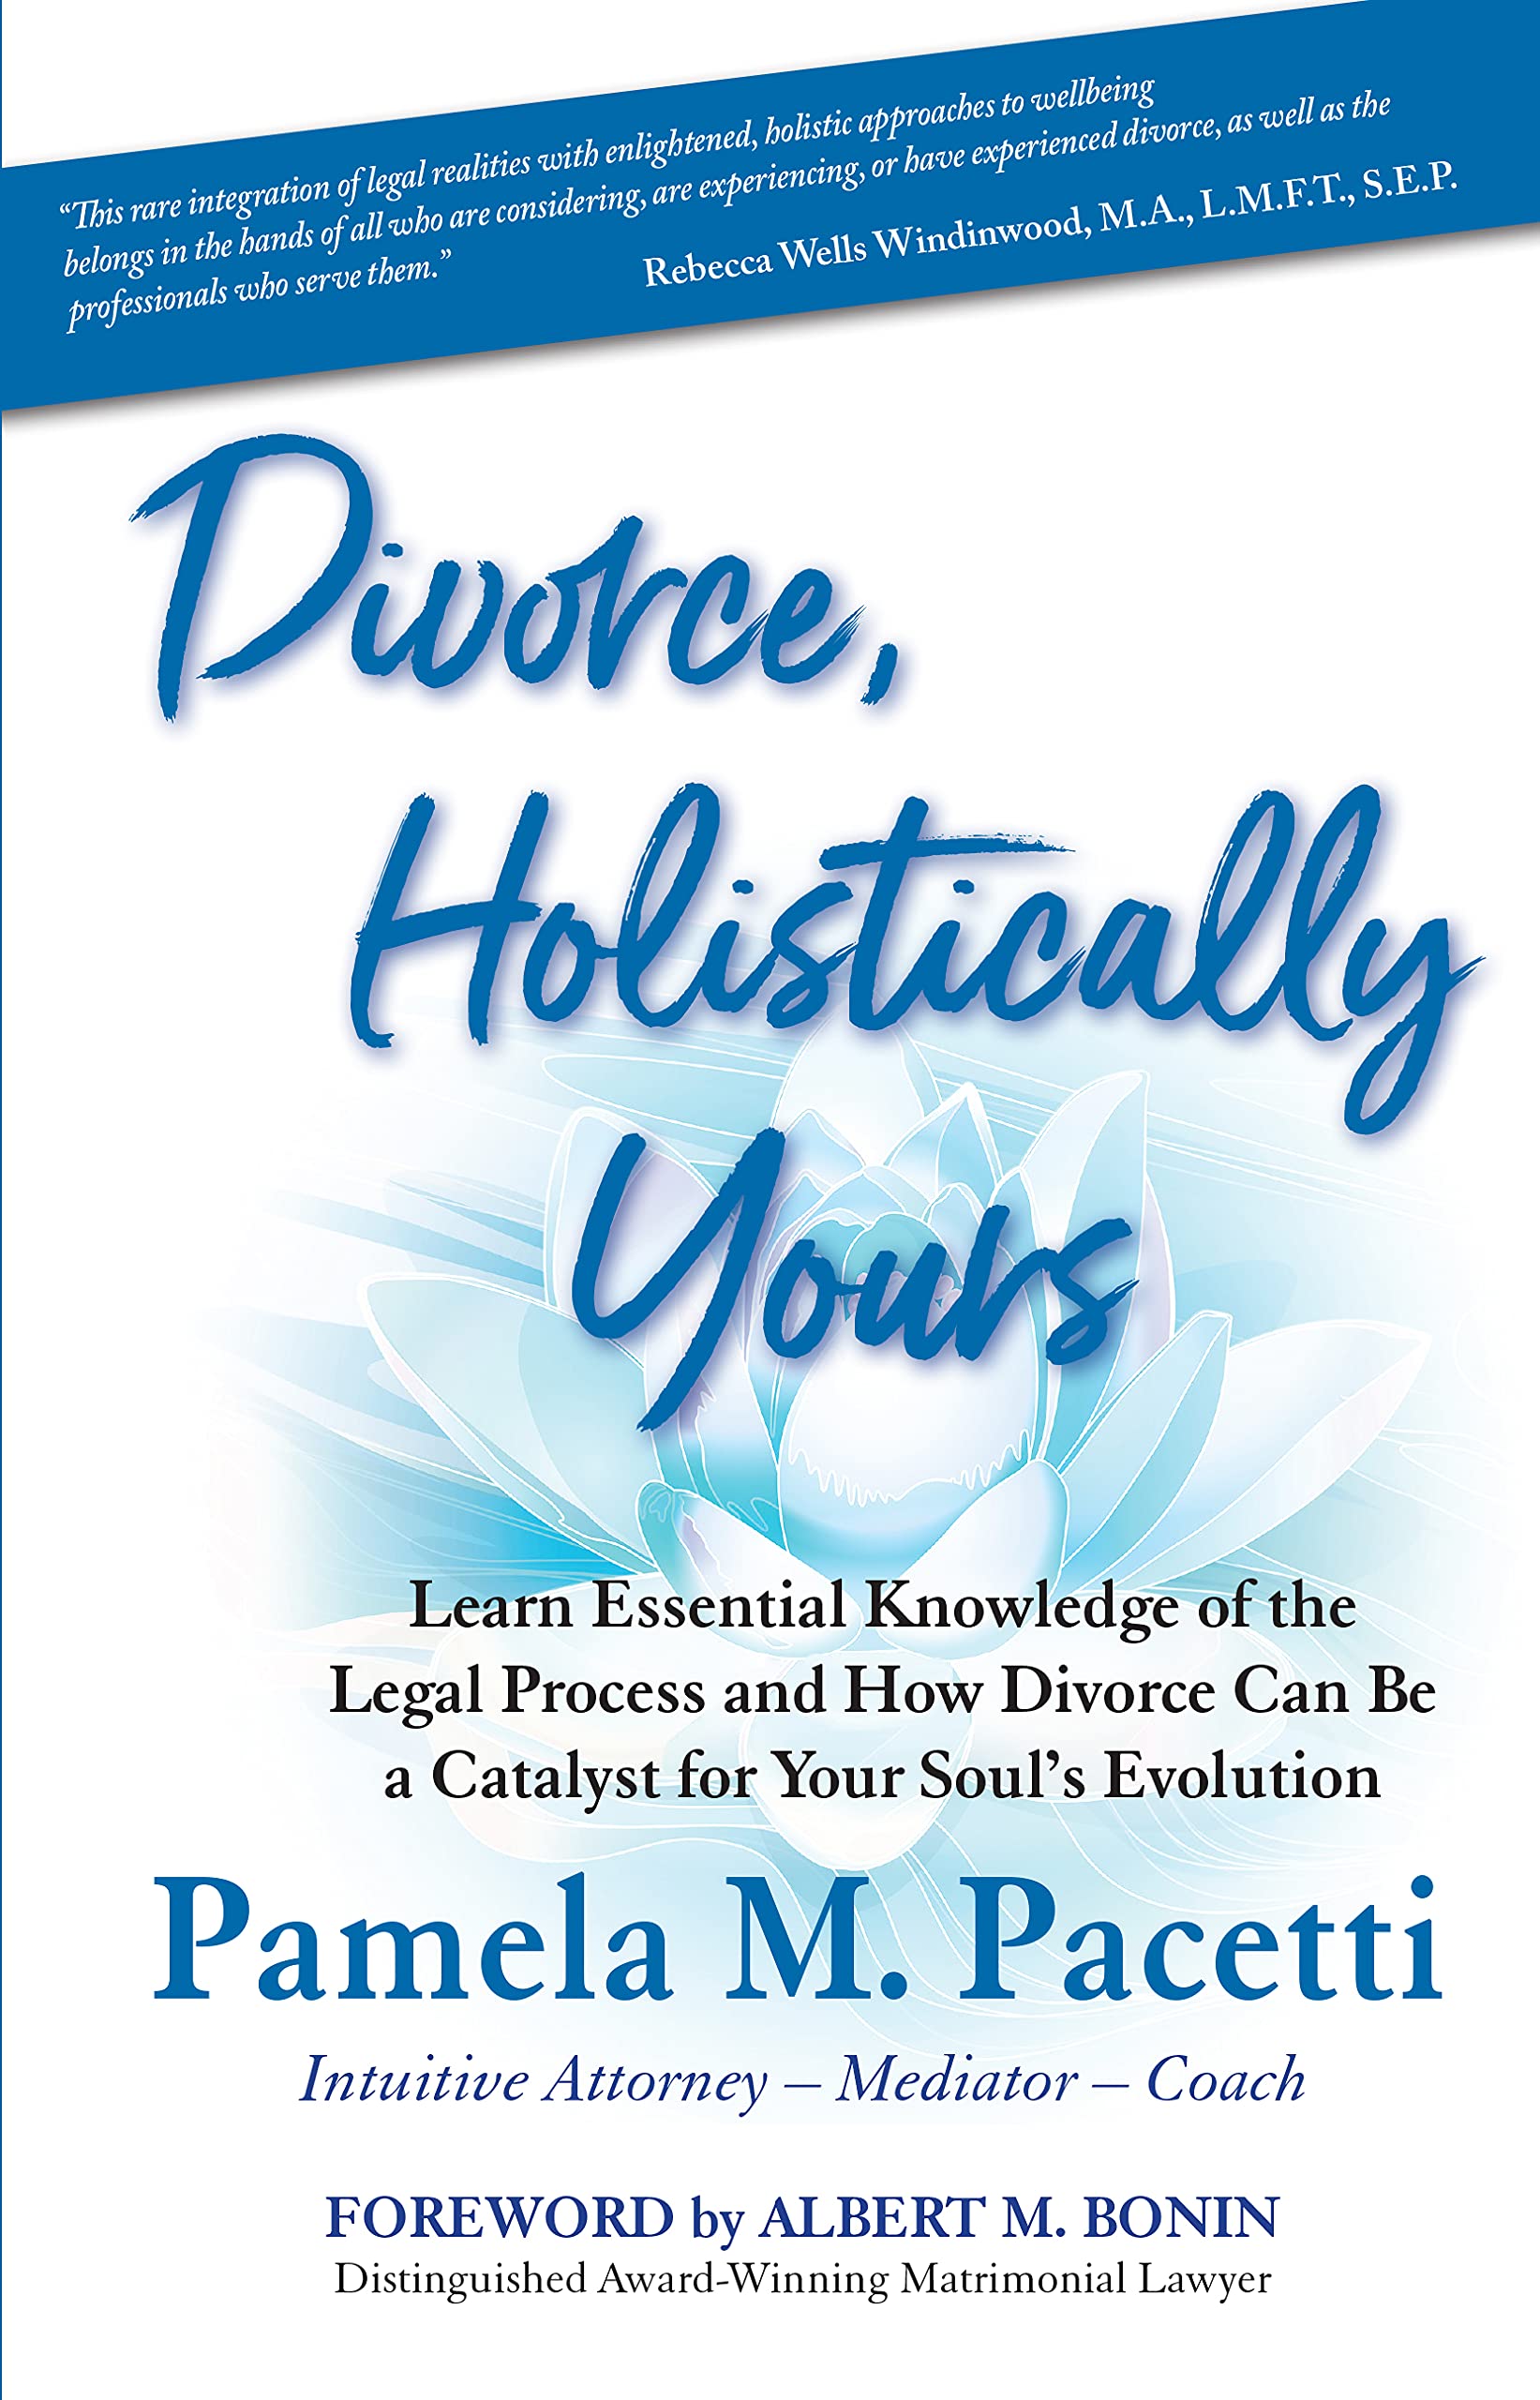 Divorce, Holistically Yours: Learn Essential Knowledge of the Legal Process and How Divorce Can Be a Catalyst for Your Soul's Evolution